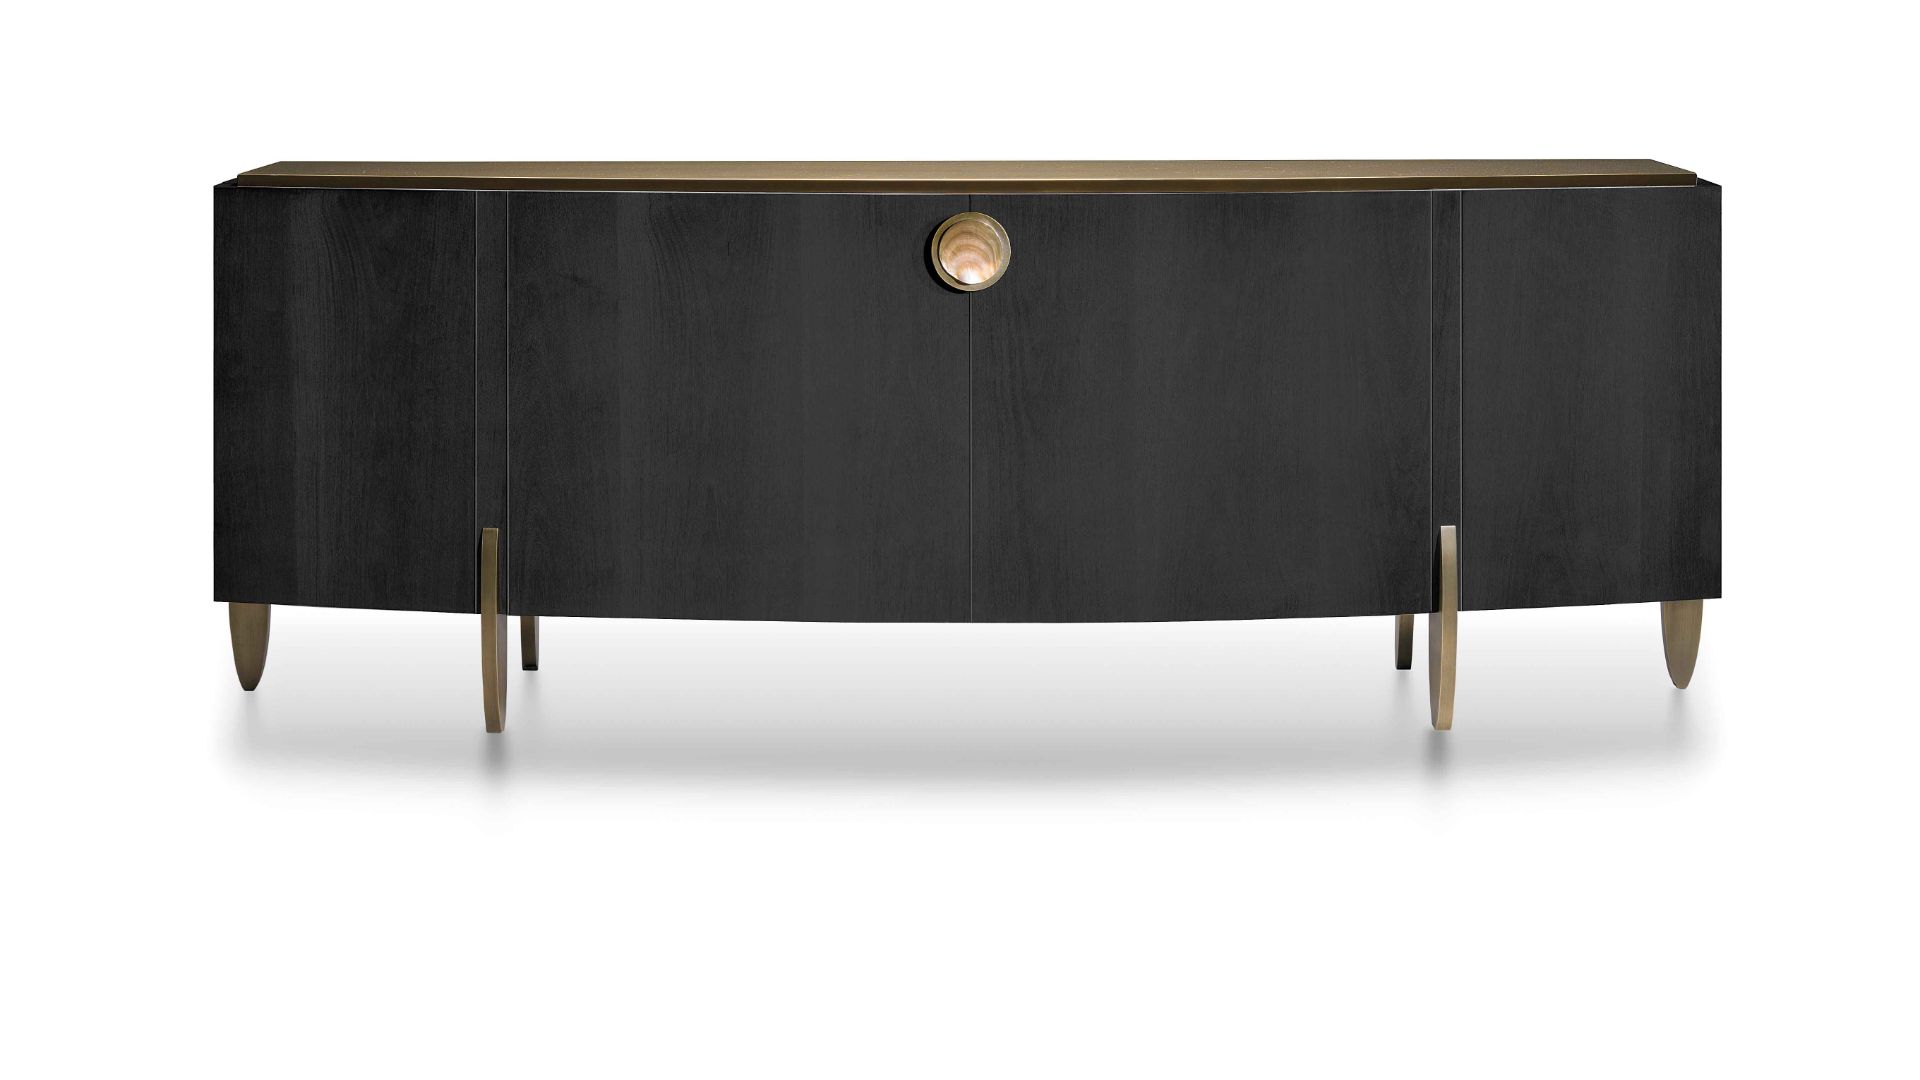 Fashion Affair Large Sideboard by Telemaco for Malerba The Buffet, for the living room, is shaped by - Bild 5 aus 25